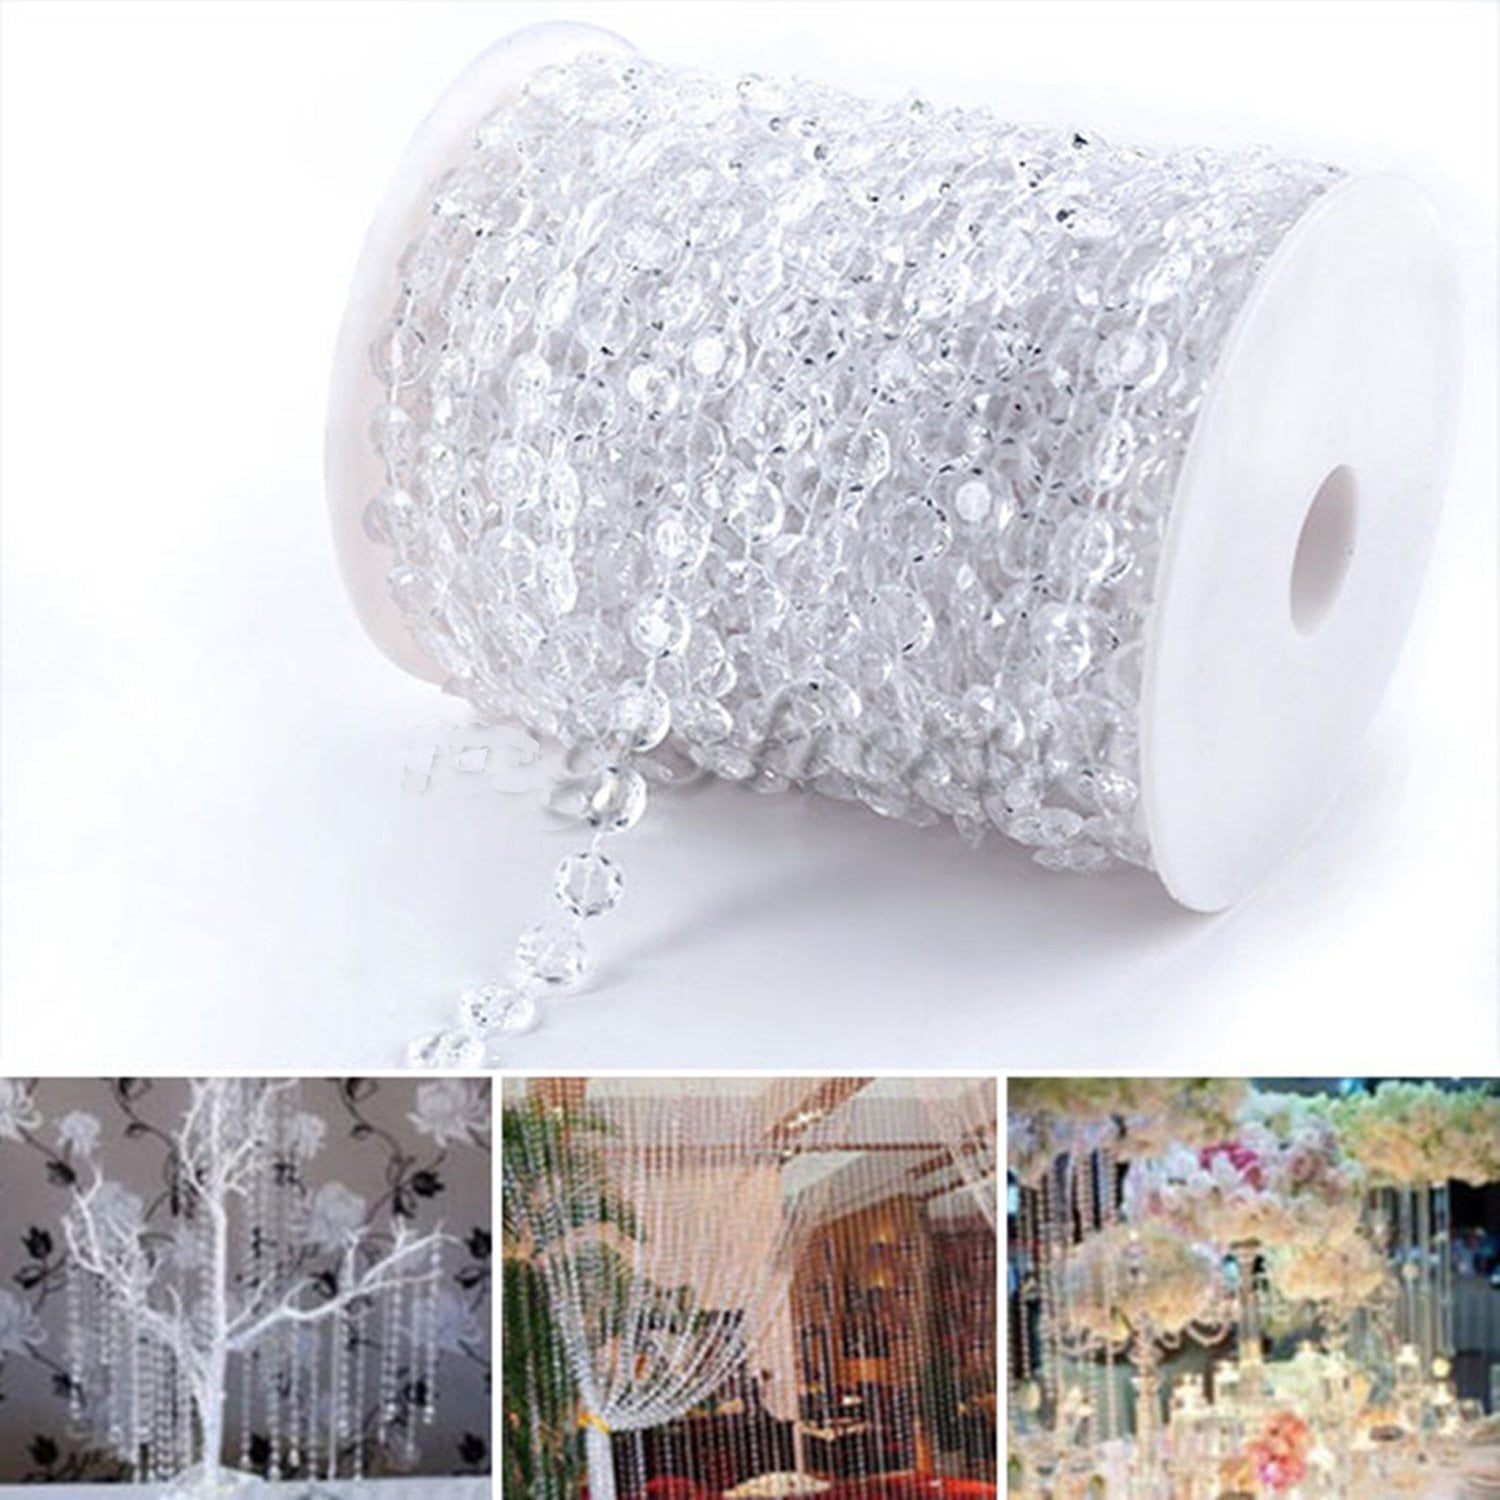 Retro PVC Metallic Beaded Curtain Strands/Garlands 20 Yards 5 colors available! 